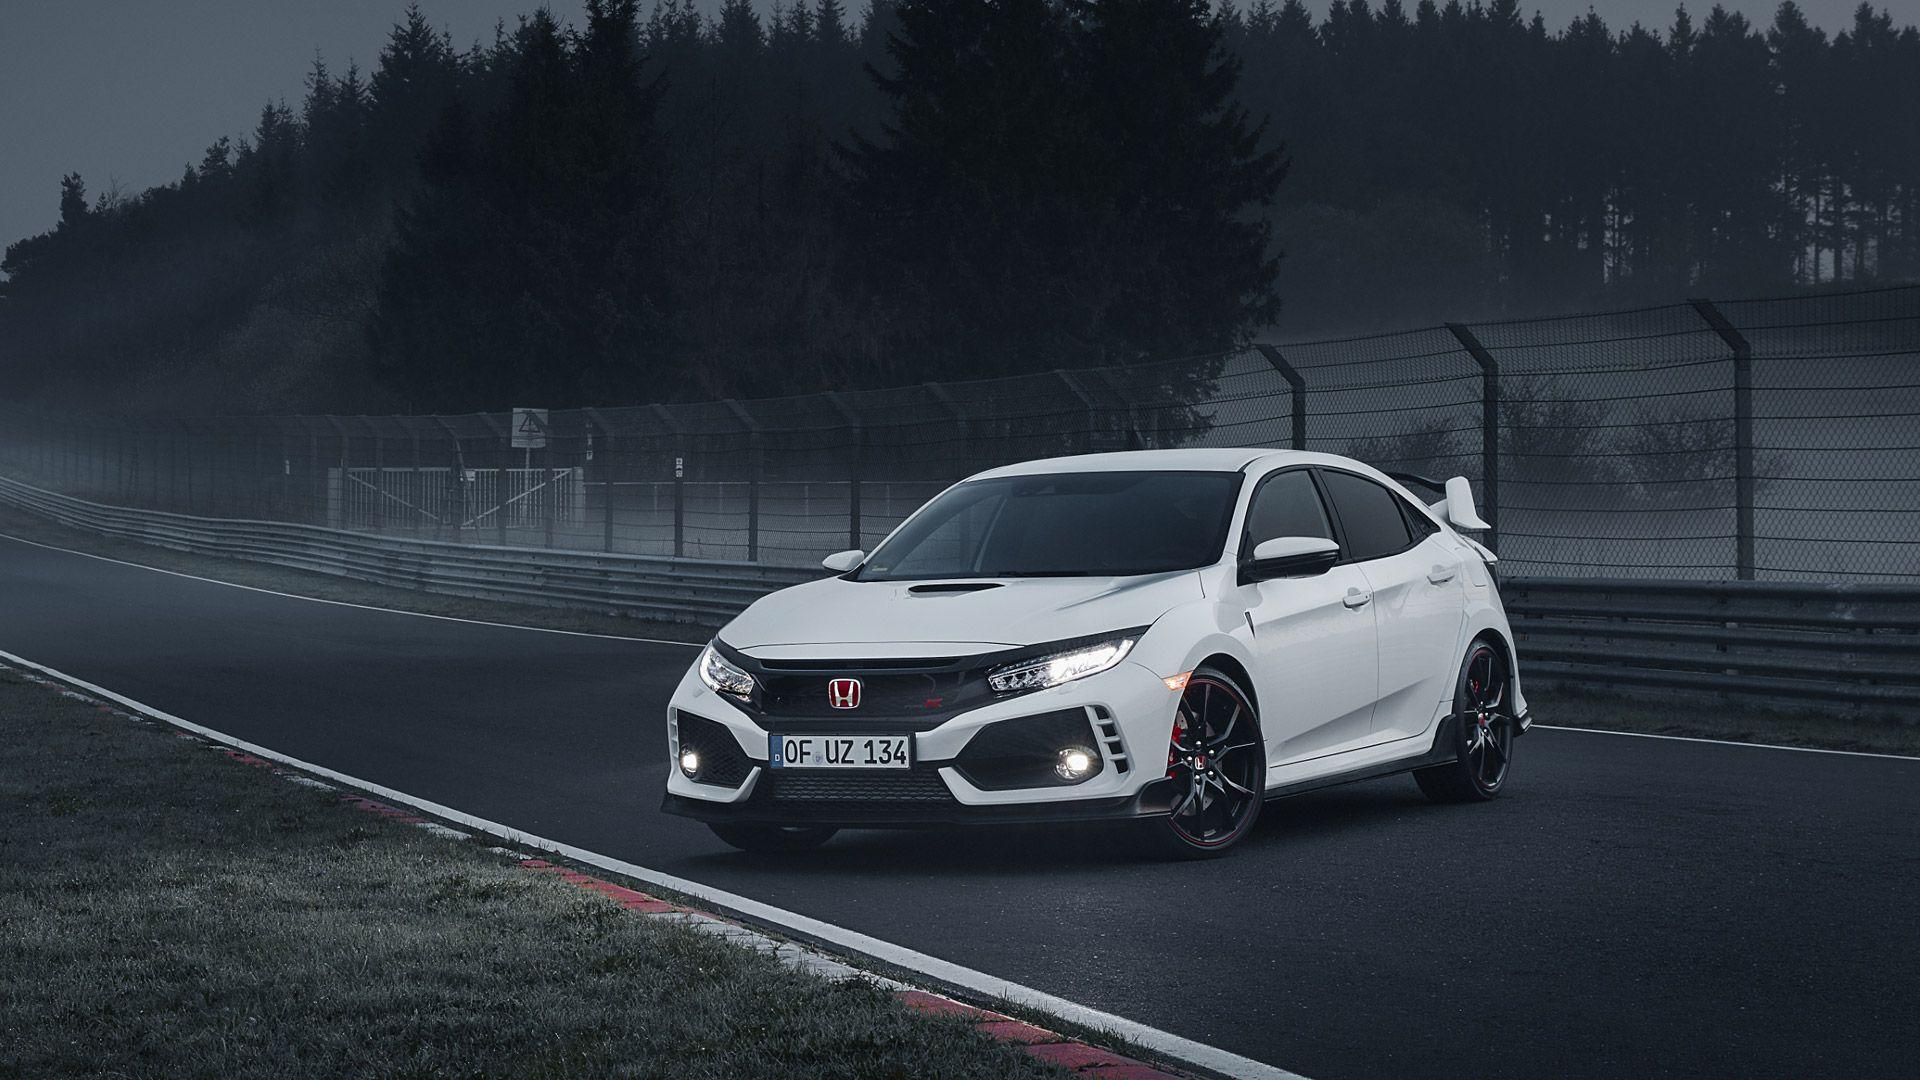 Honda Civic Type R Wallpaper and Background Image